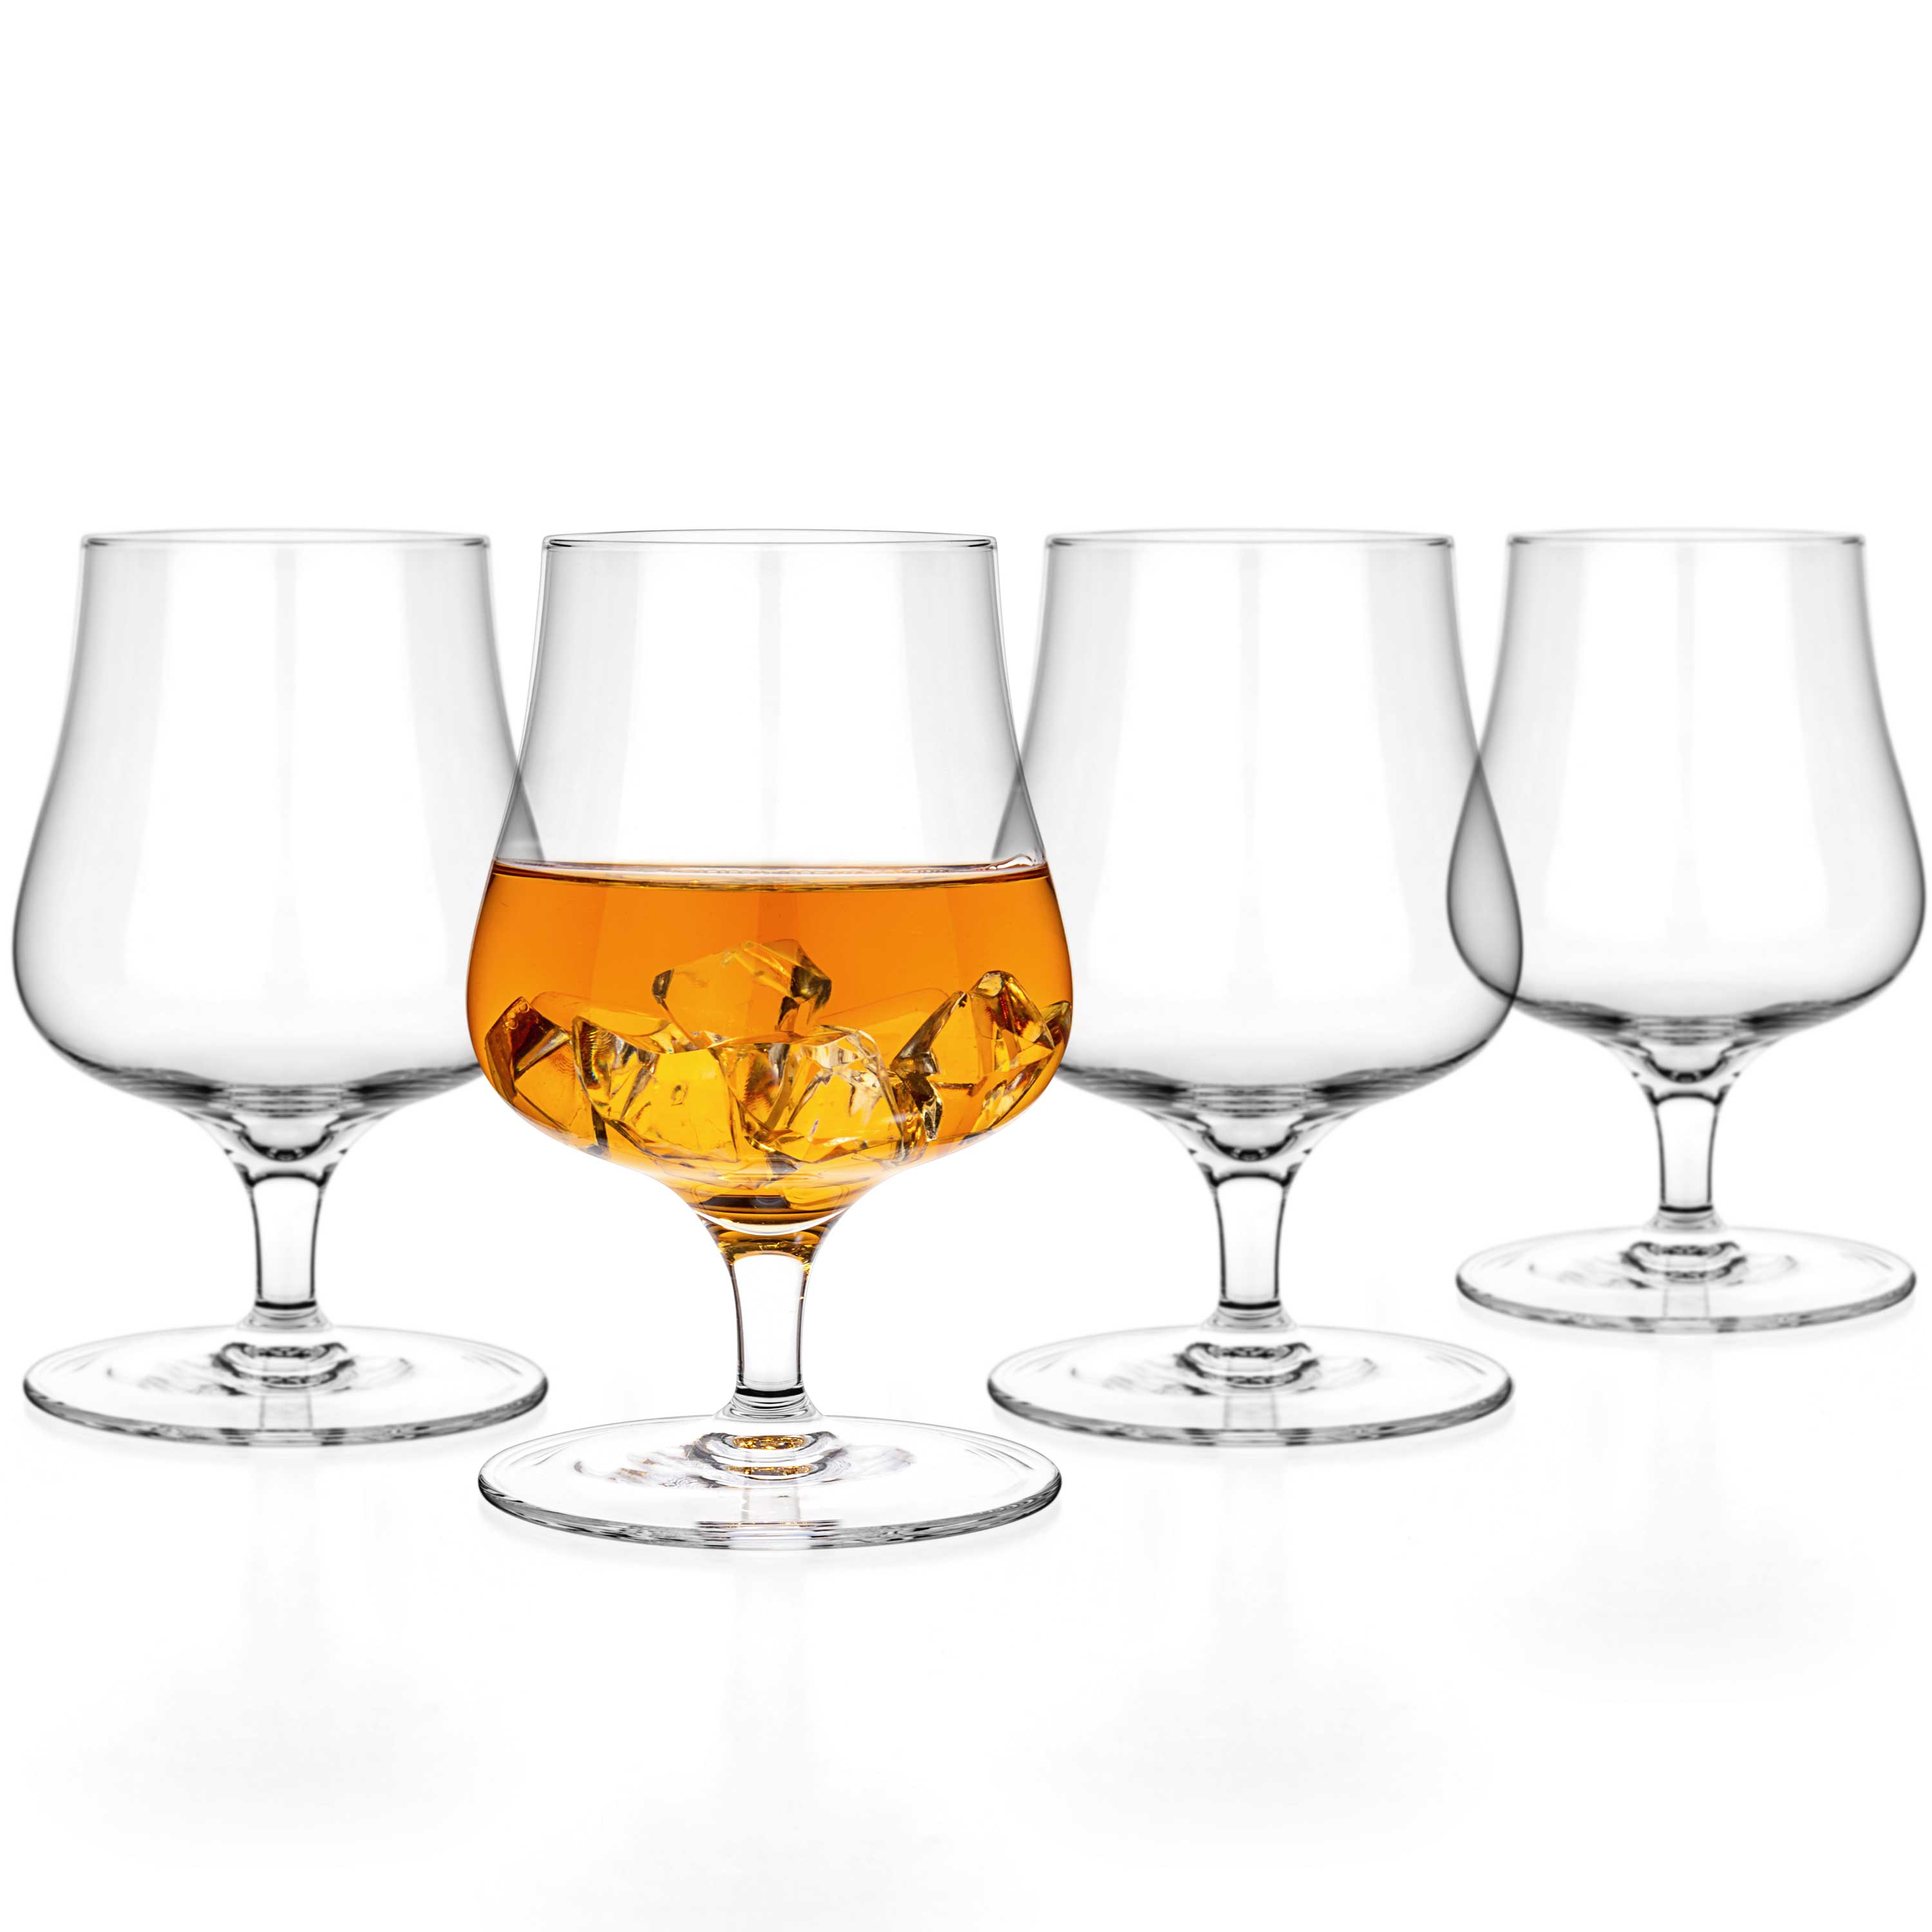 LUXBE - Bourbon Whisky Crystal Glass Snifter, Set of 4 -  Narrow Rim Tasting Glasses - Handcrafted - Good for Cognac Brandy Scotch -  9-ounce/260ml: Snifters